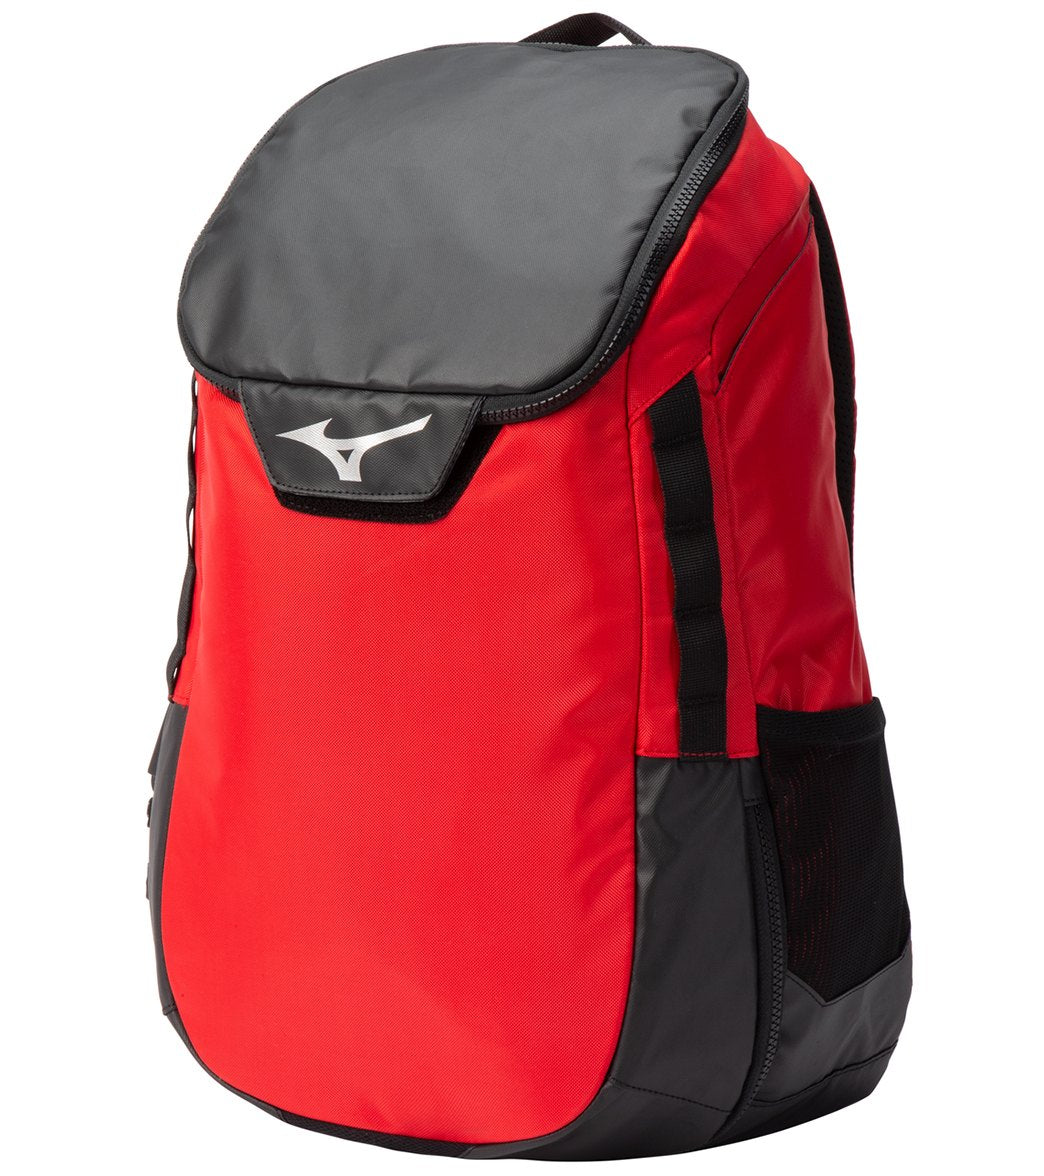 Mizuno Crossover X Backpack - Navy-Red Navy/Red - Swimoutlet.com